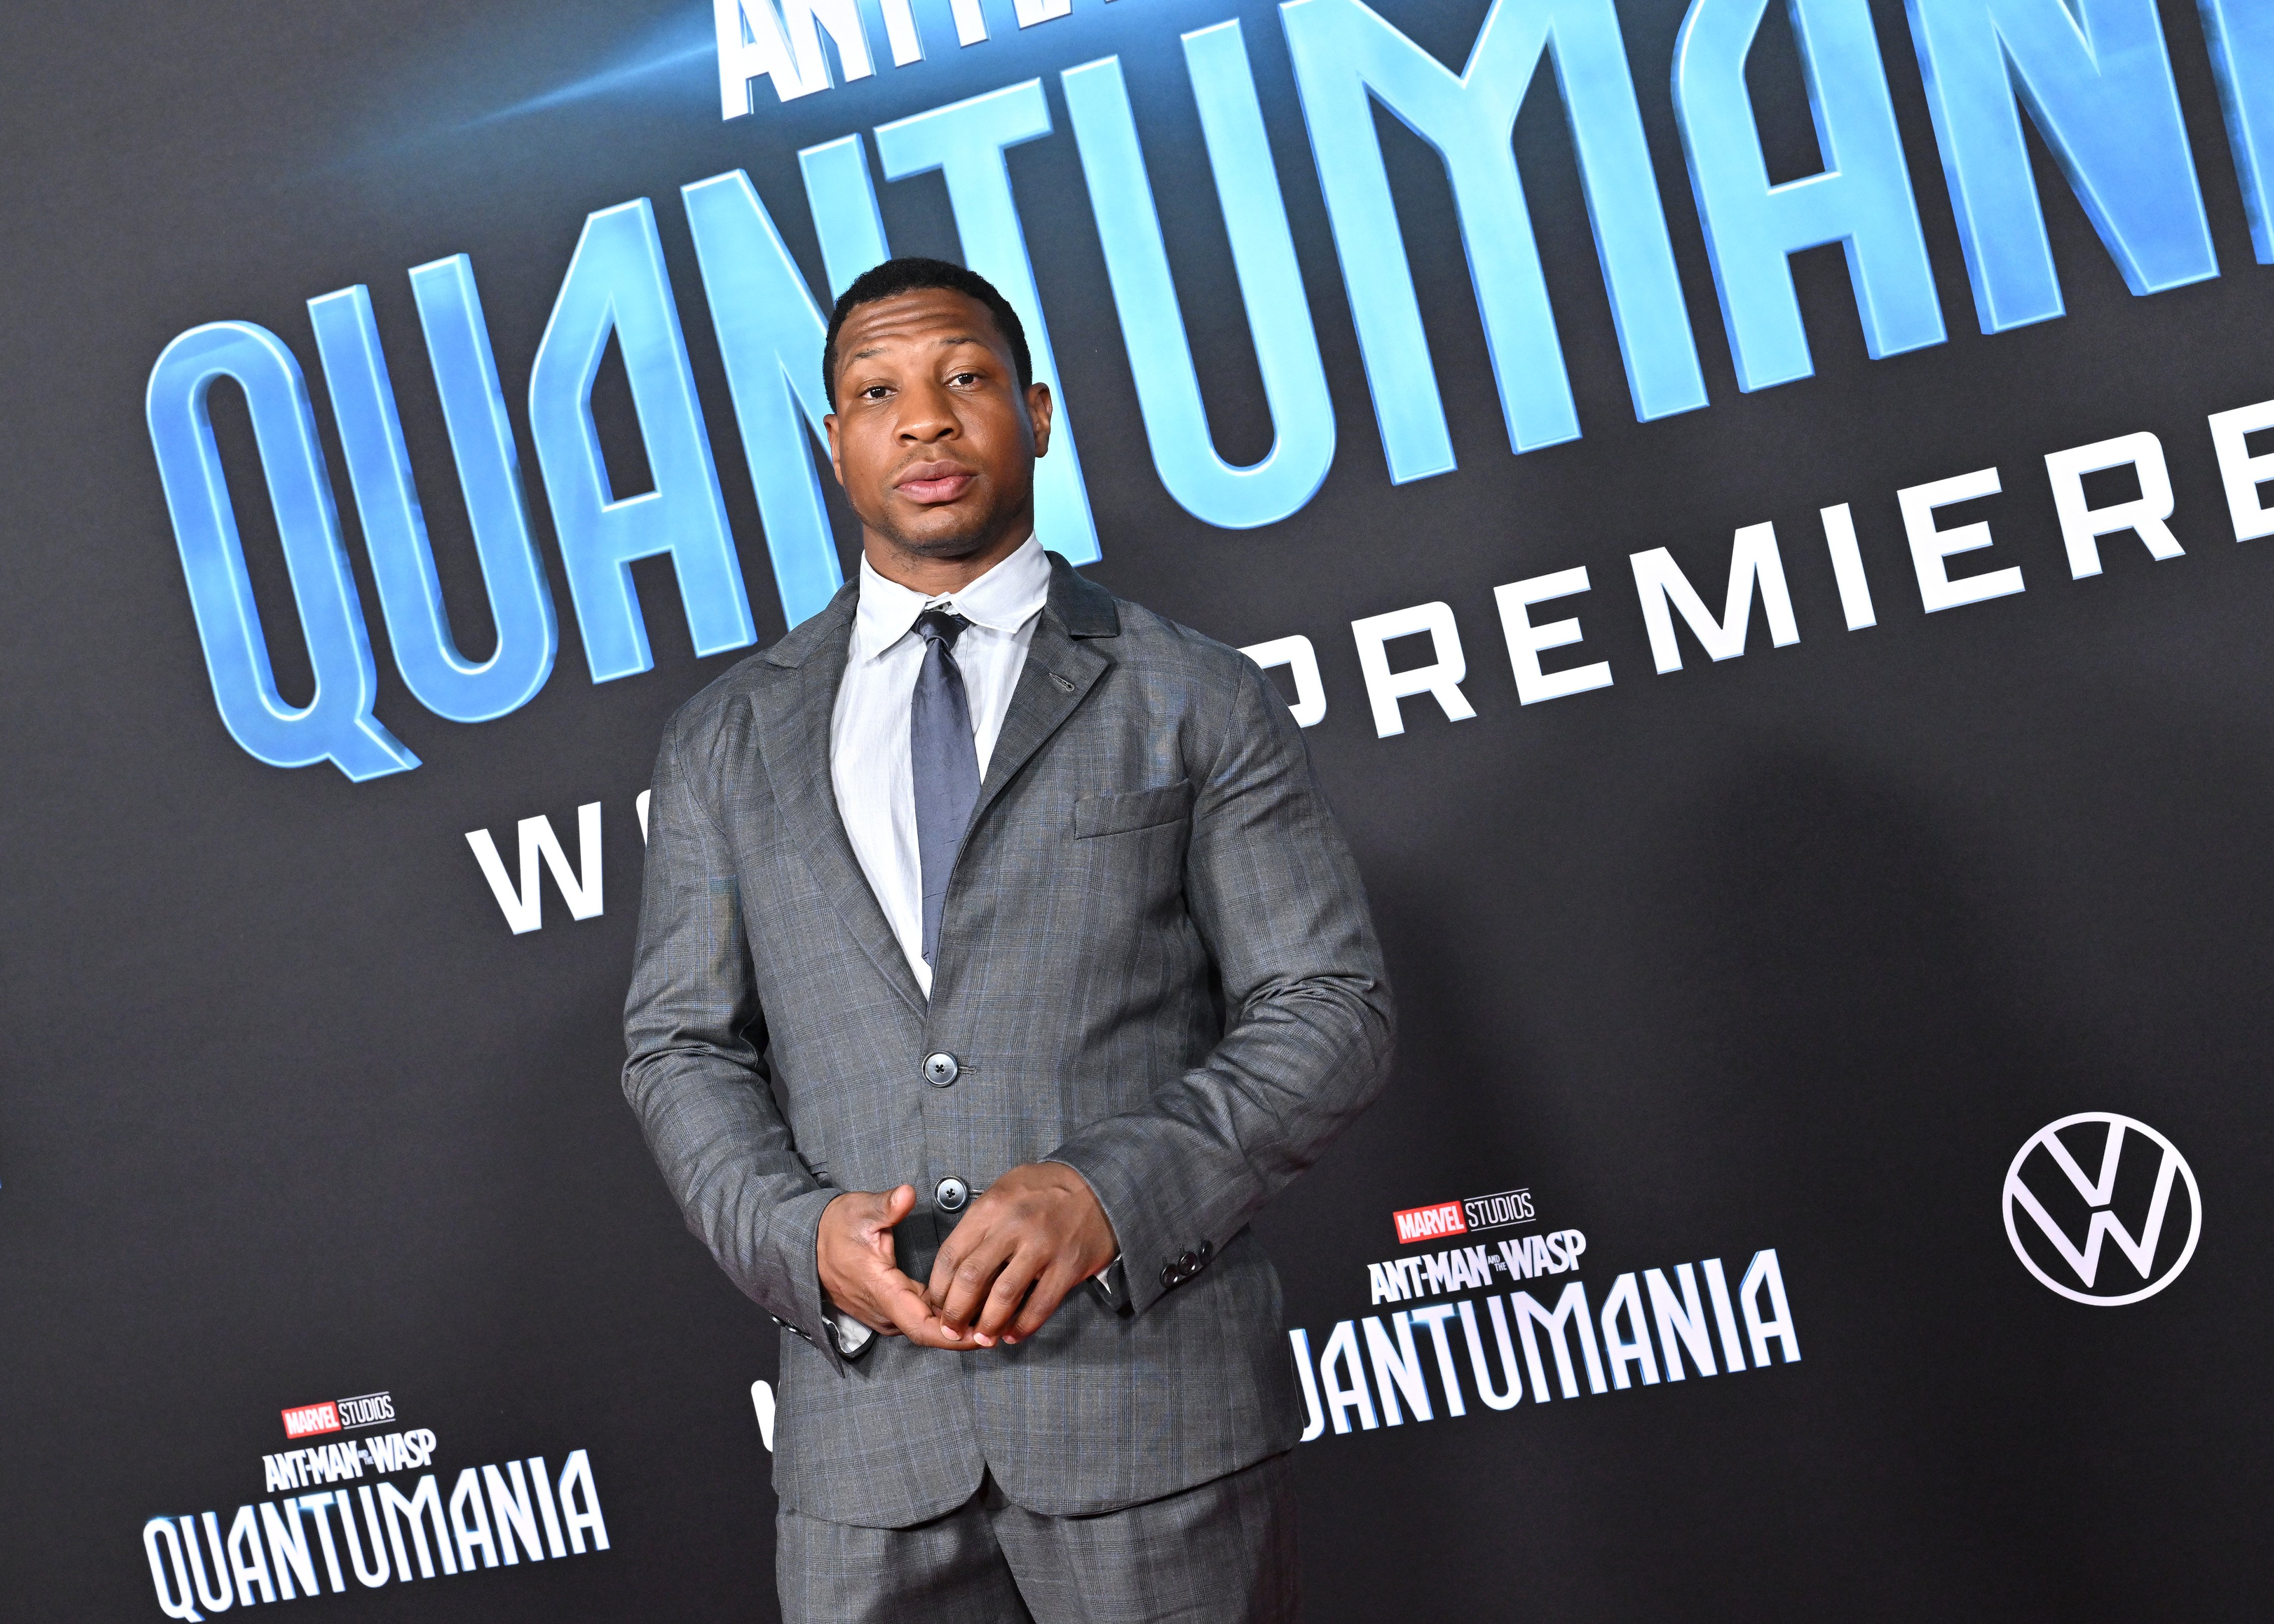 Jonathan Majors at the premiere of "Ant-Man and The Wasp: Quantumania" at Regency Village Theatre in Los Angeles, California, on February 06, 2023. | Source: Getty Images